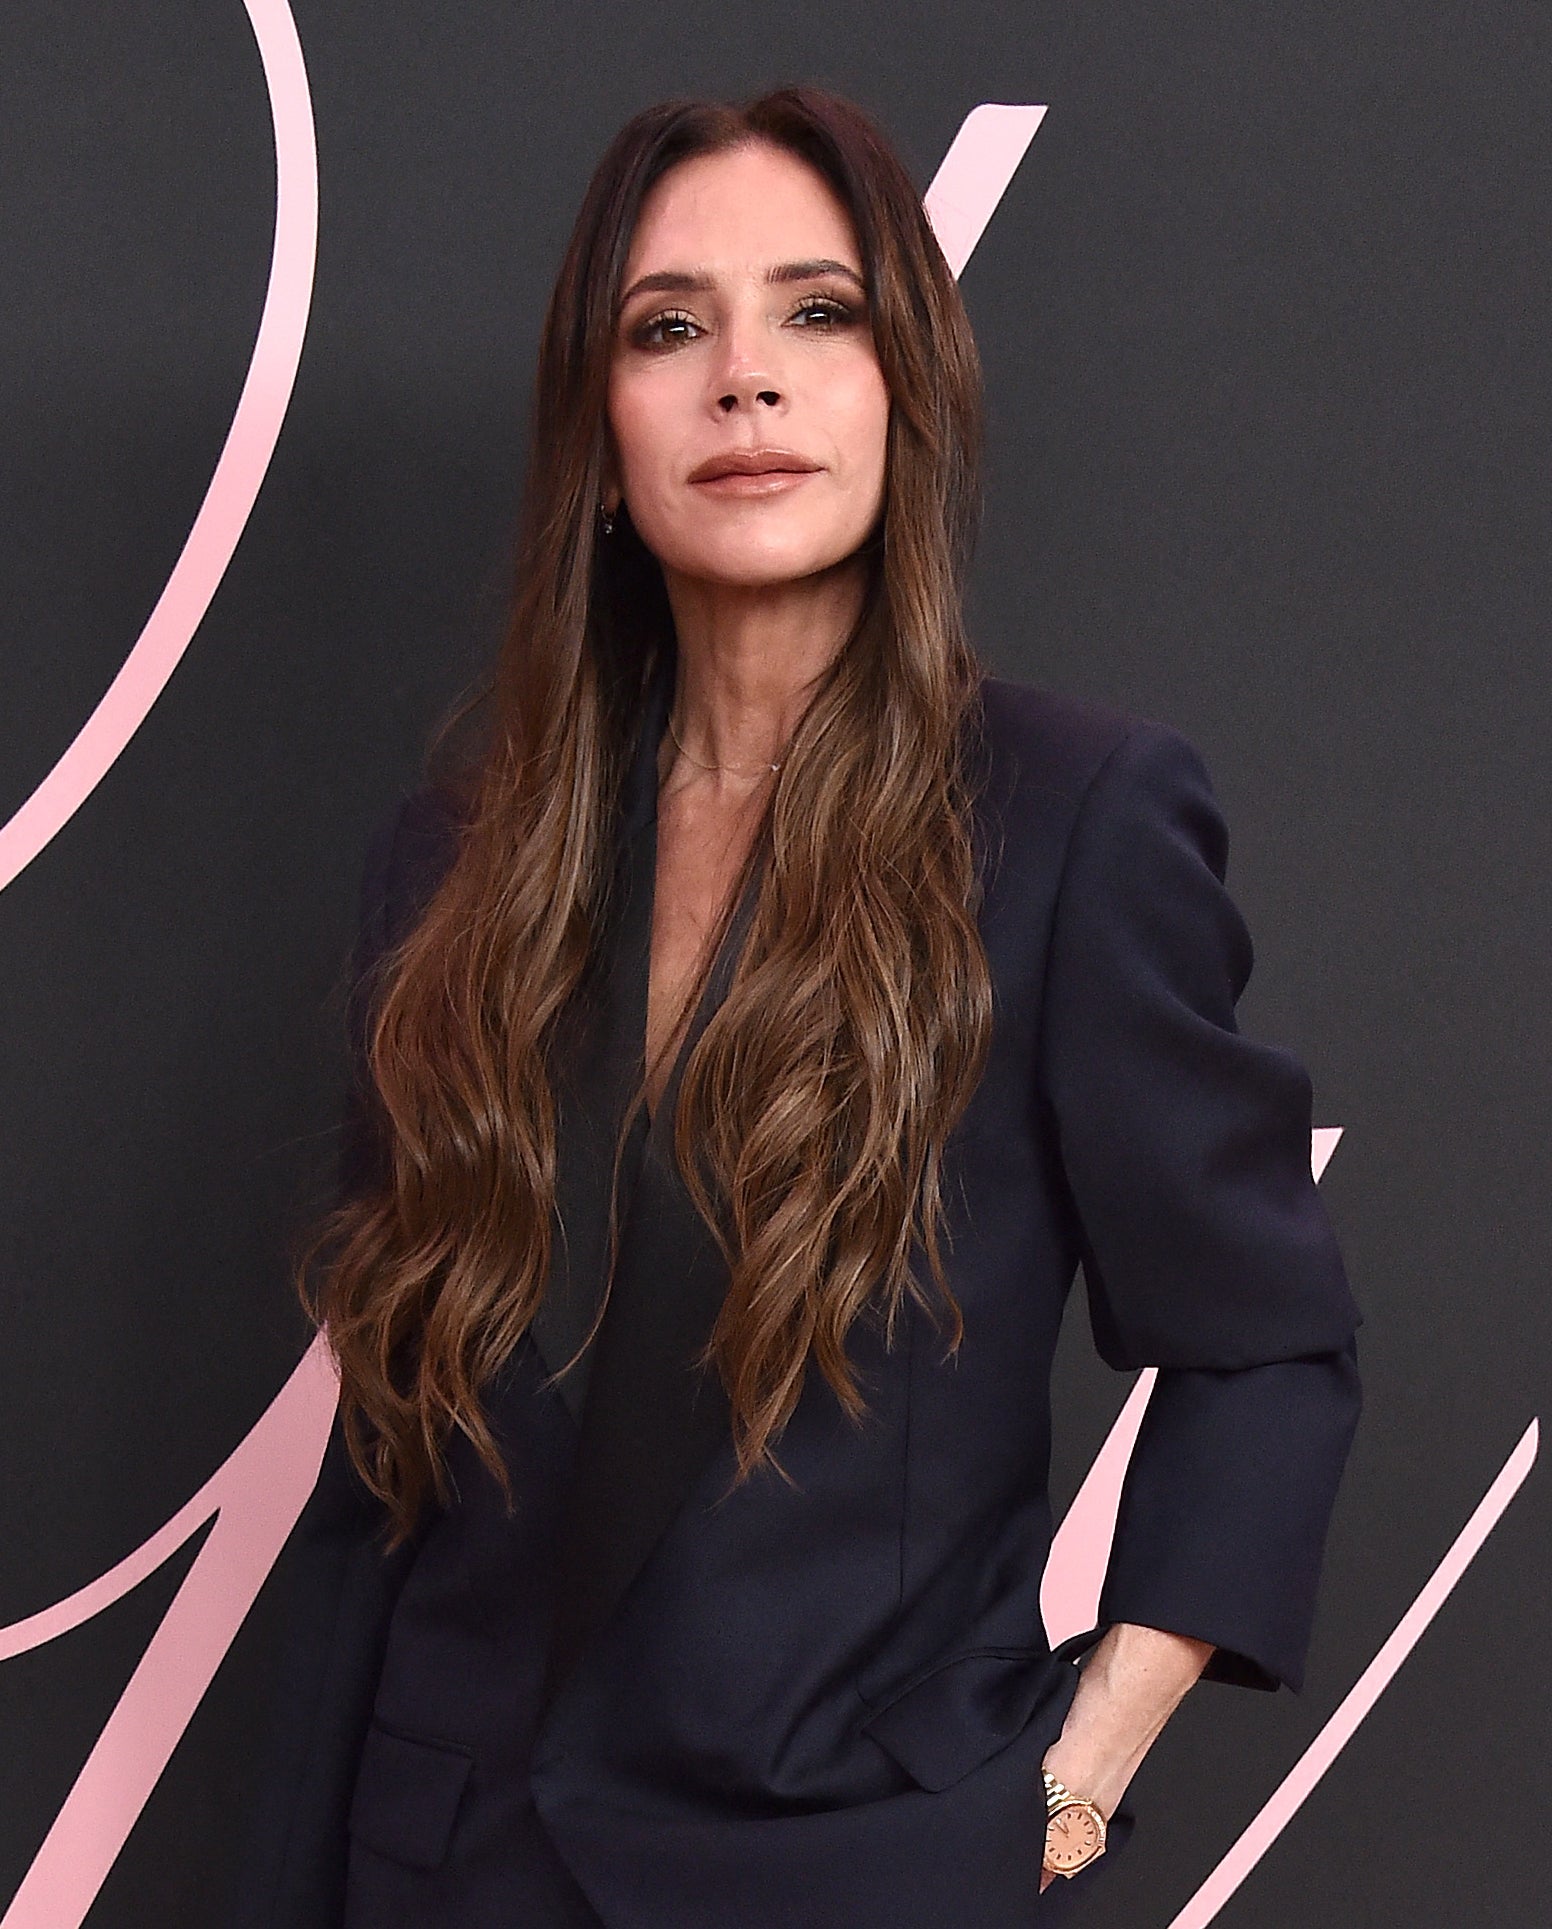 Victoria Beckham in a tailored pantsuit with pockets, standing confidently on a pink carpet